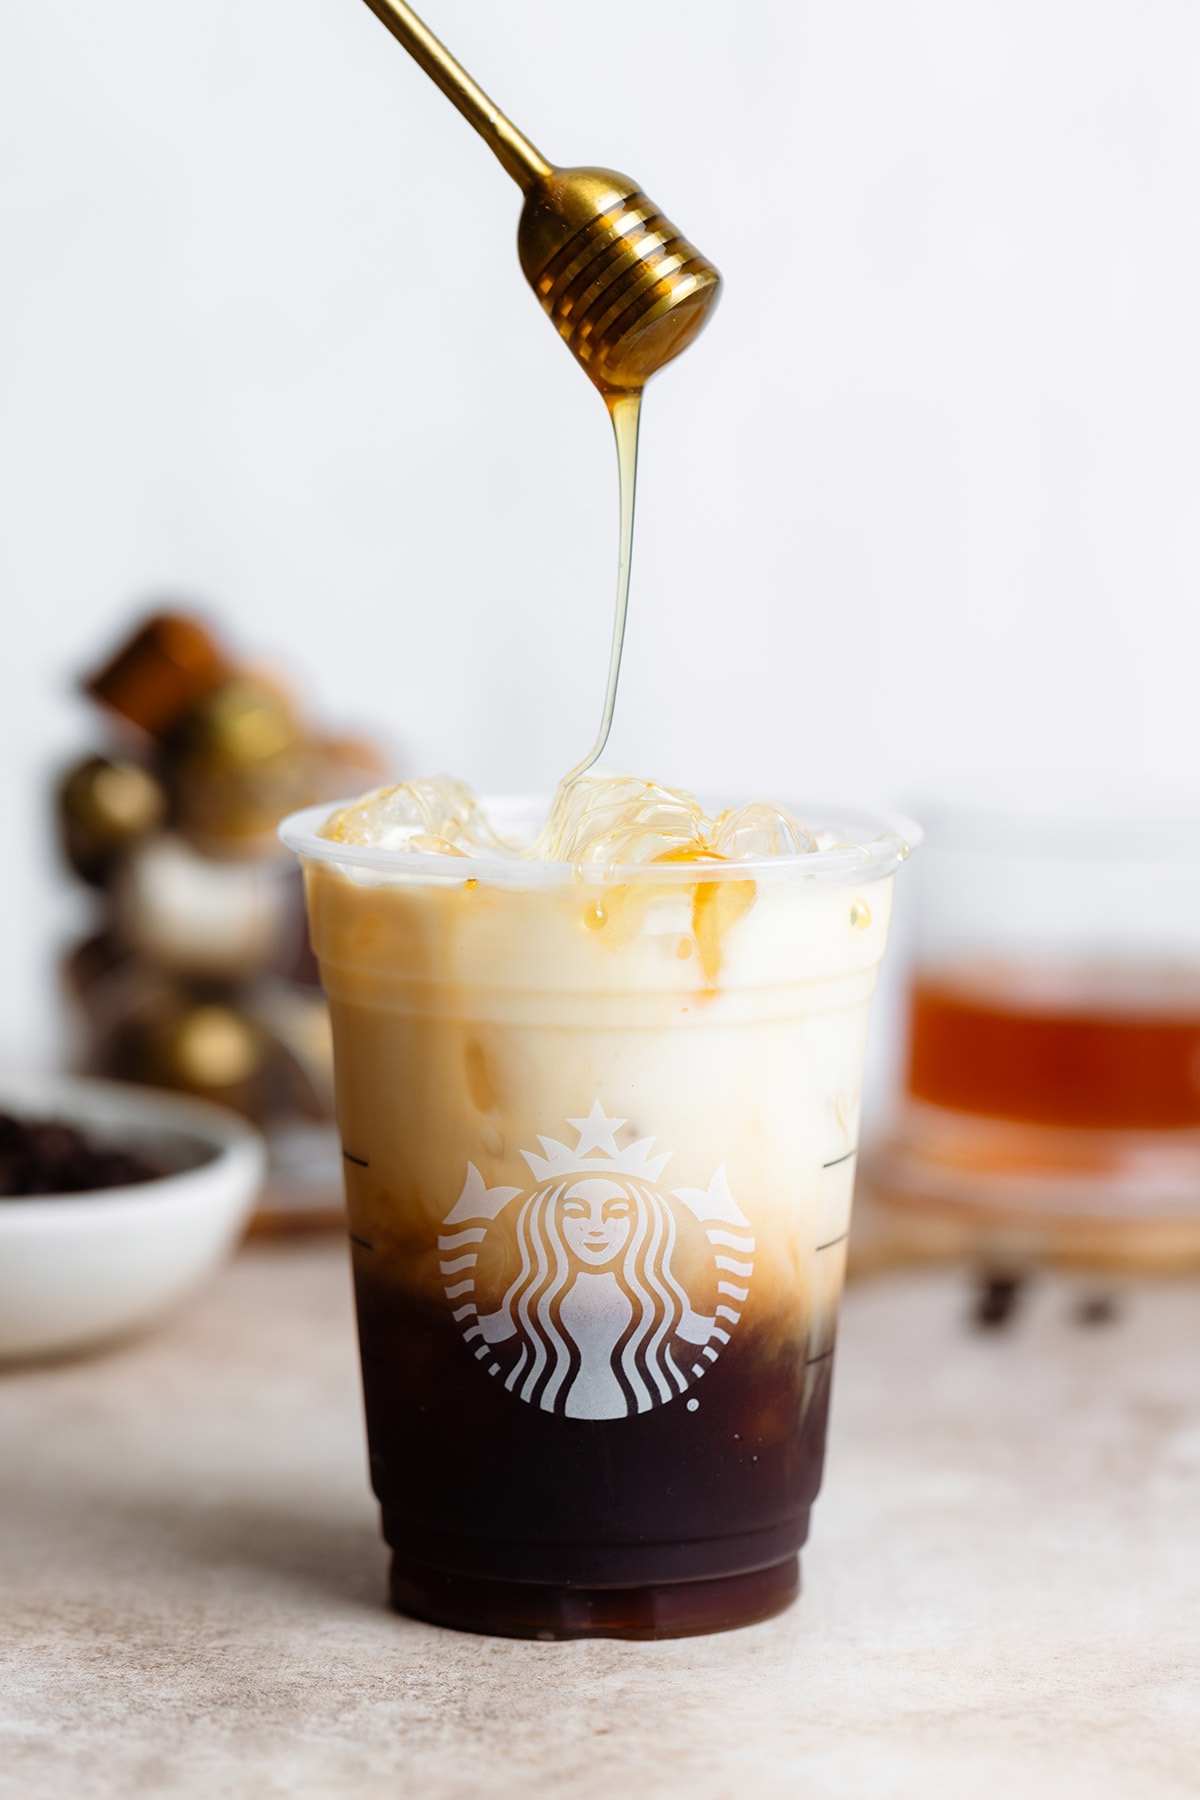 Honey being drizzled on iced coffee in a plastic cup.